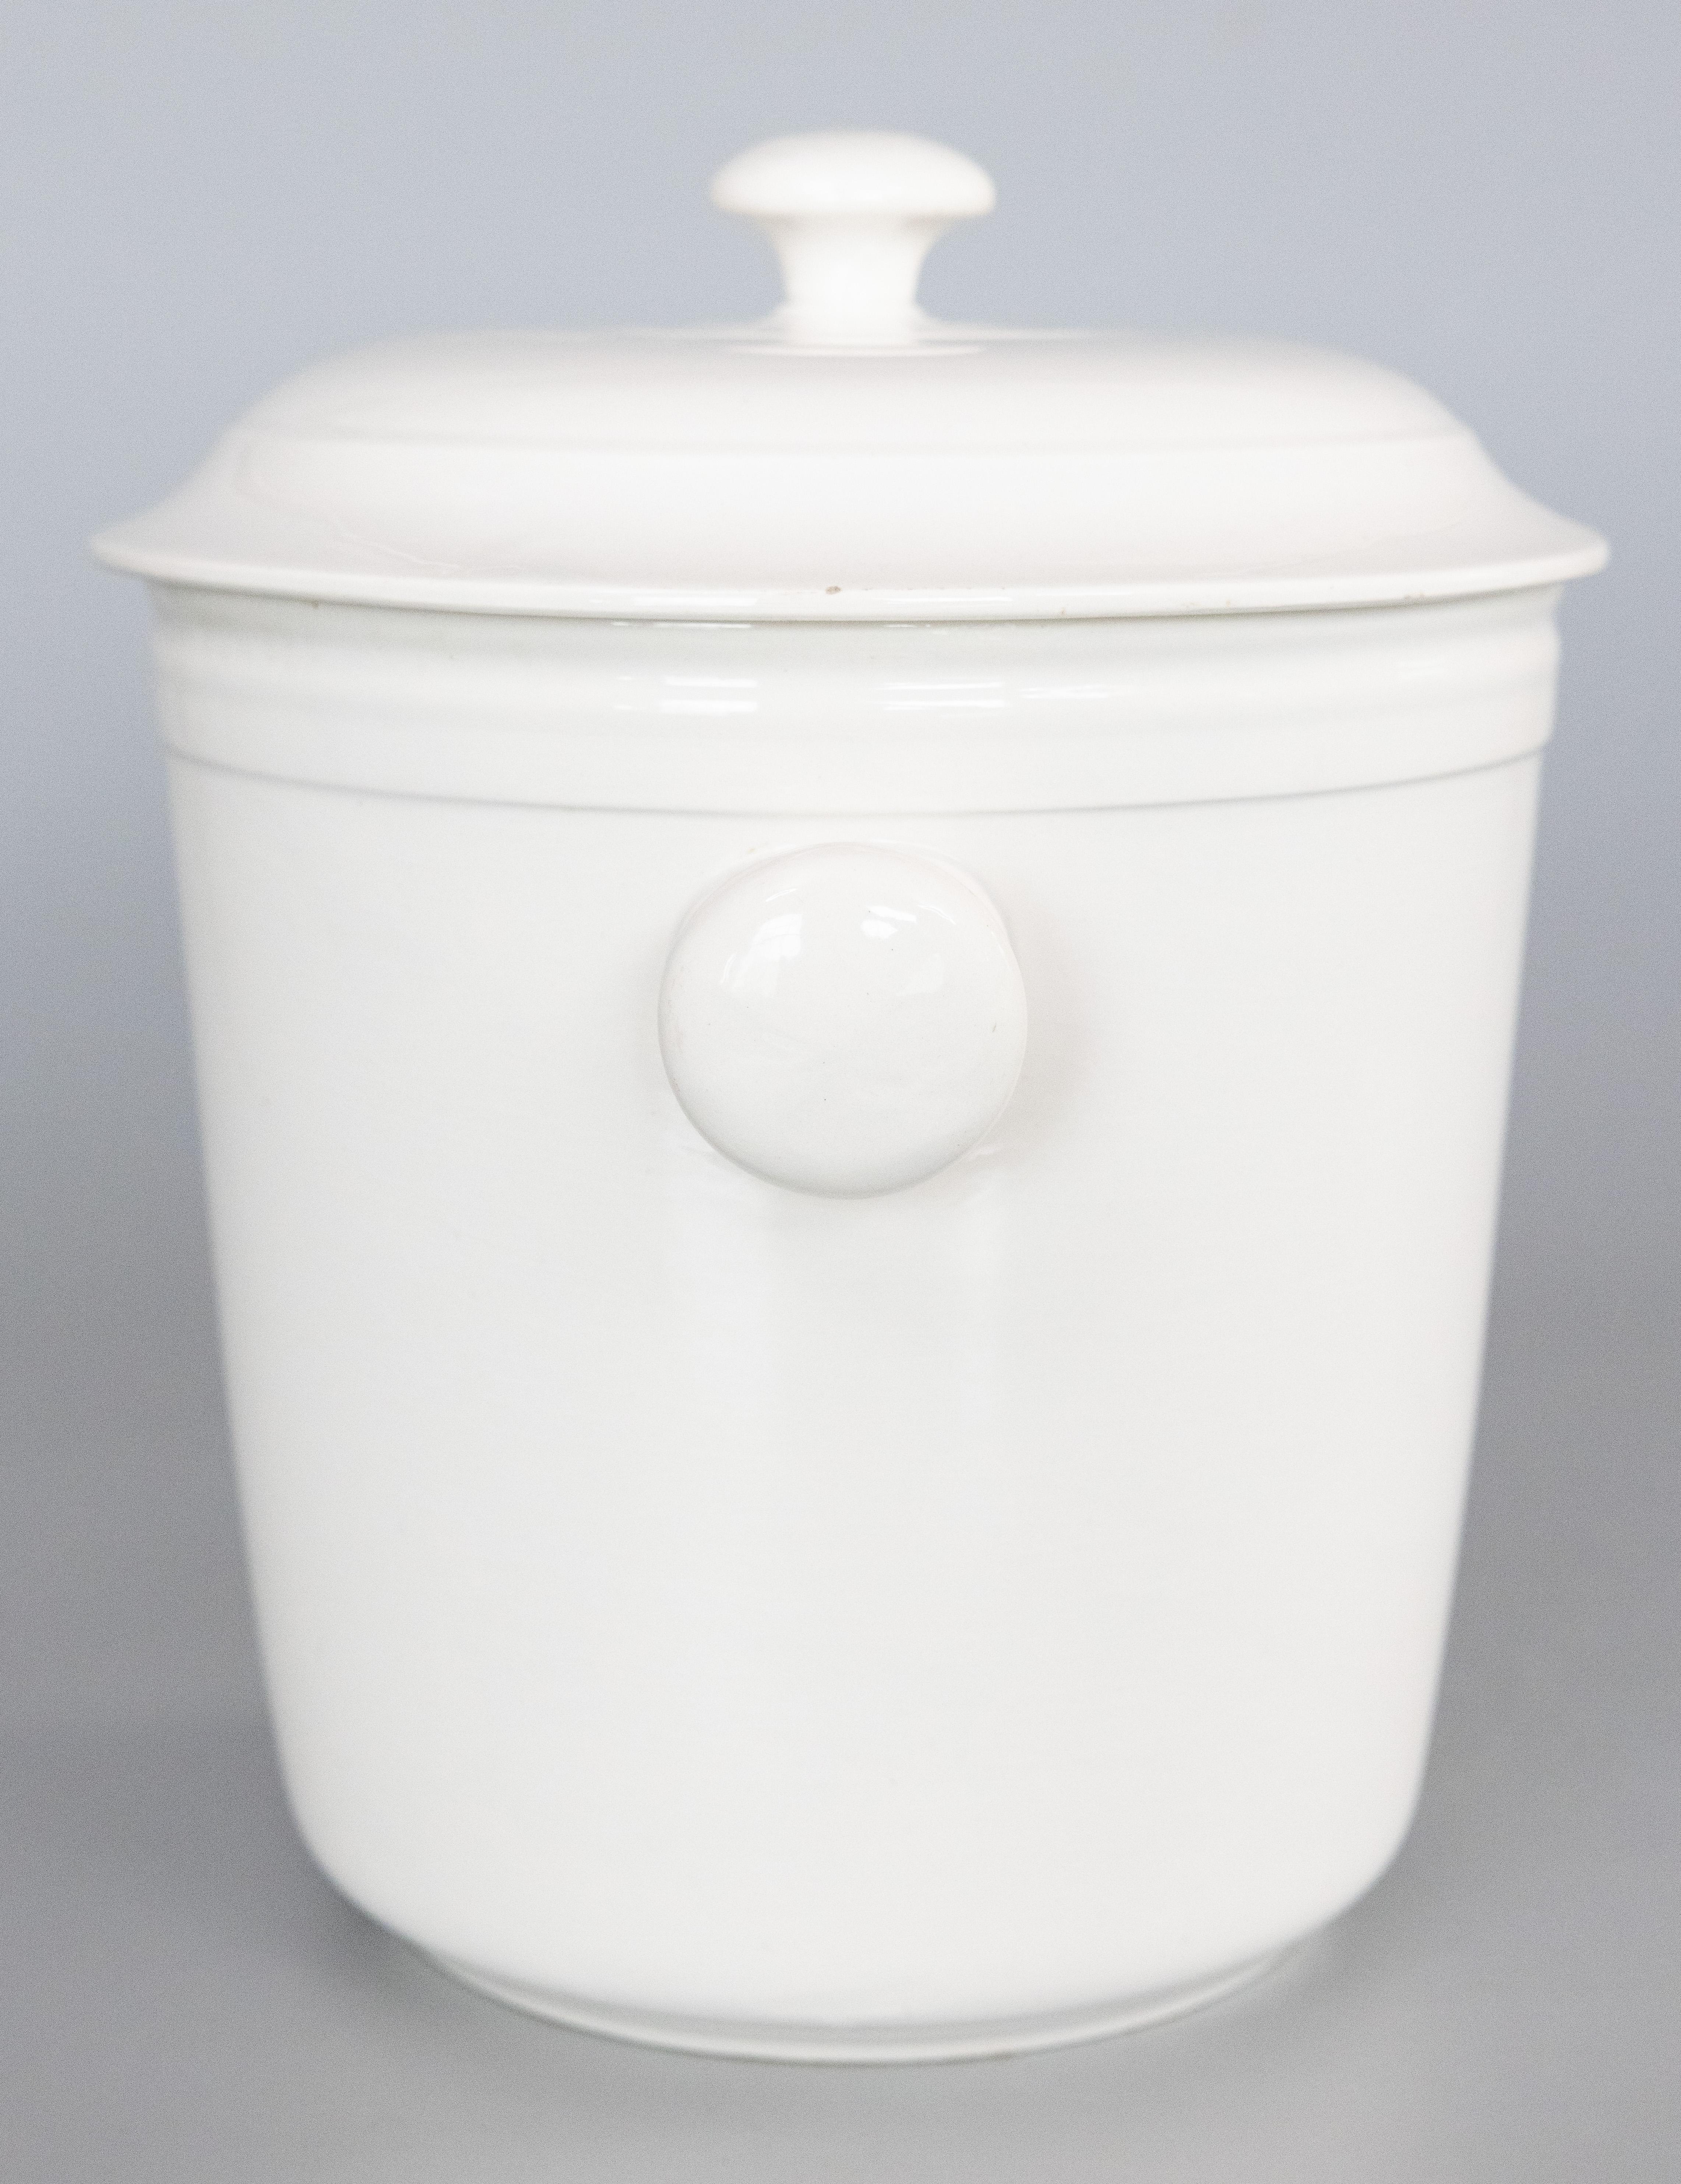 A rare large antique French white ironstone lidded ice bucket, circa 1890. Made by famous French pottery maker Creil et Montereau in the Oise Department of France. Marked on reverse. A highly collectible and hard to find piece of French ironstone in